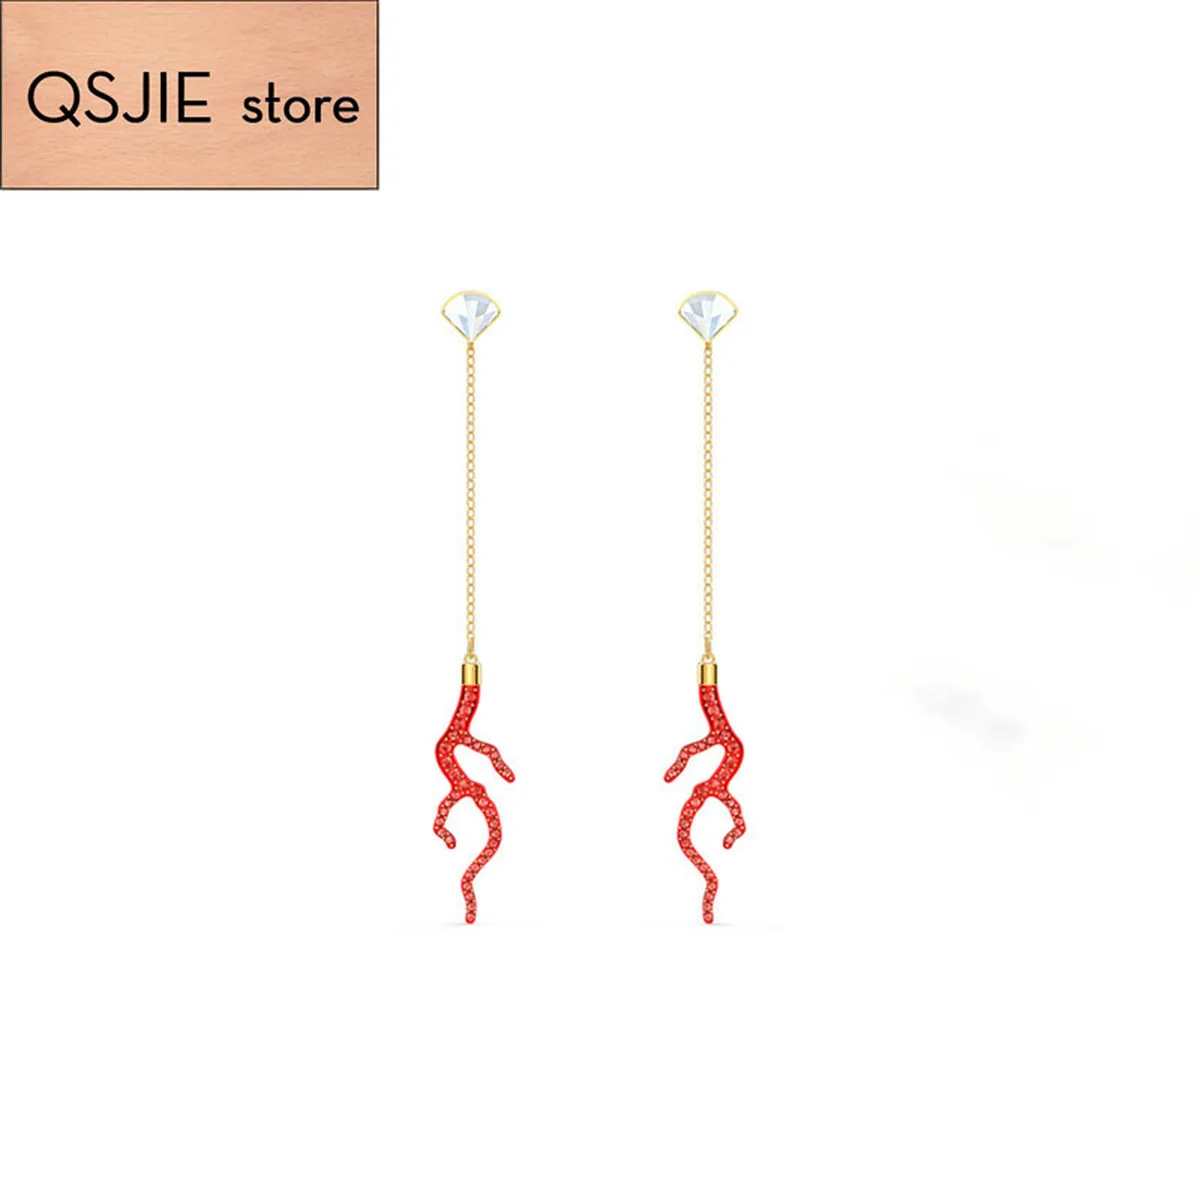 

QSJIE High quality swa1: 1 2020 new personality charming Ocean series red coral earrings earrings for girls fashion jewelry